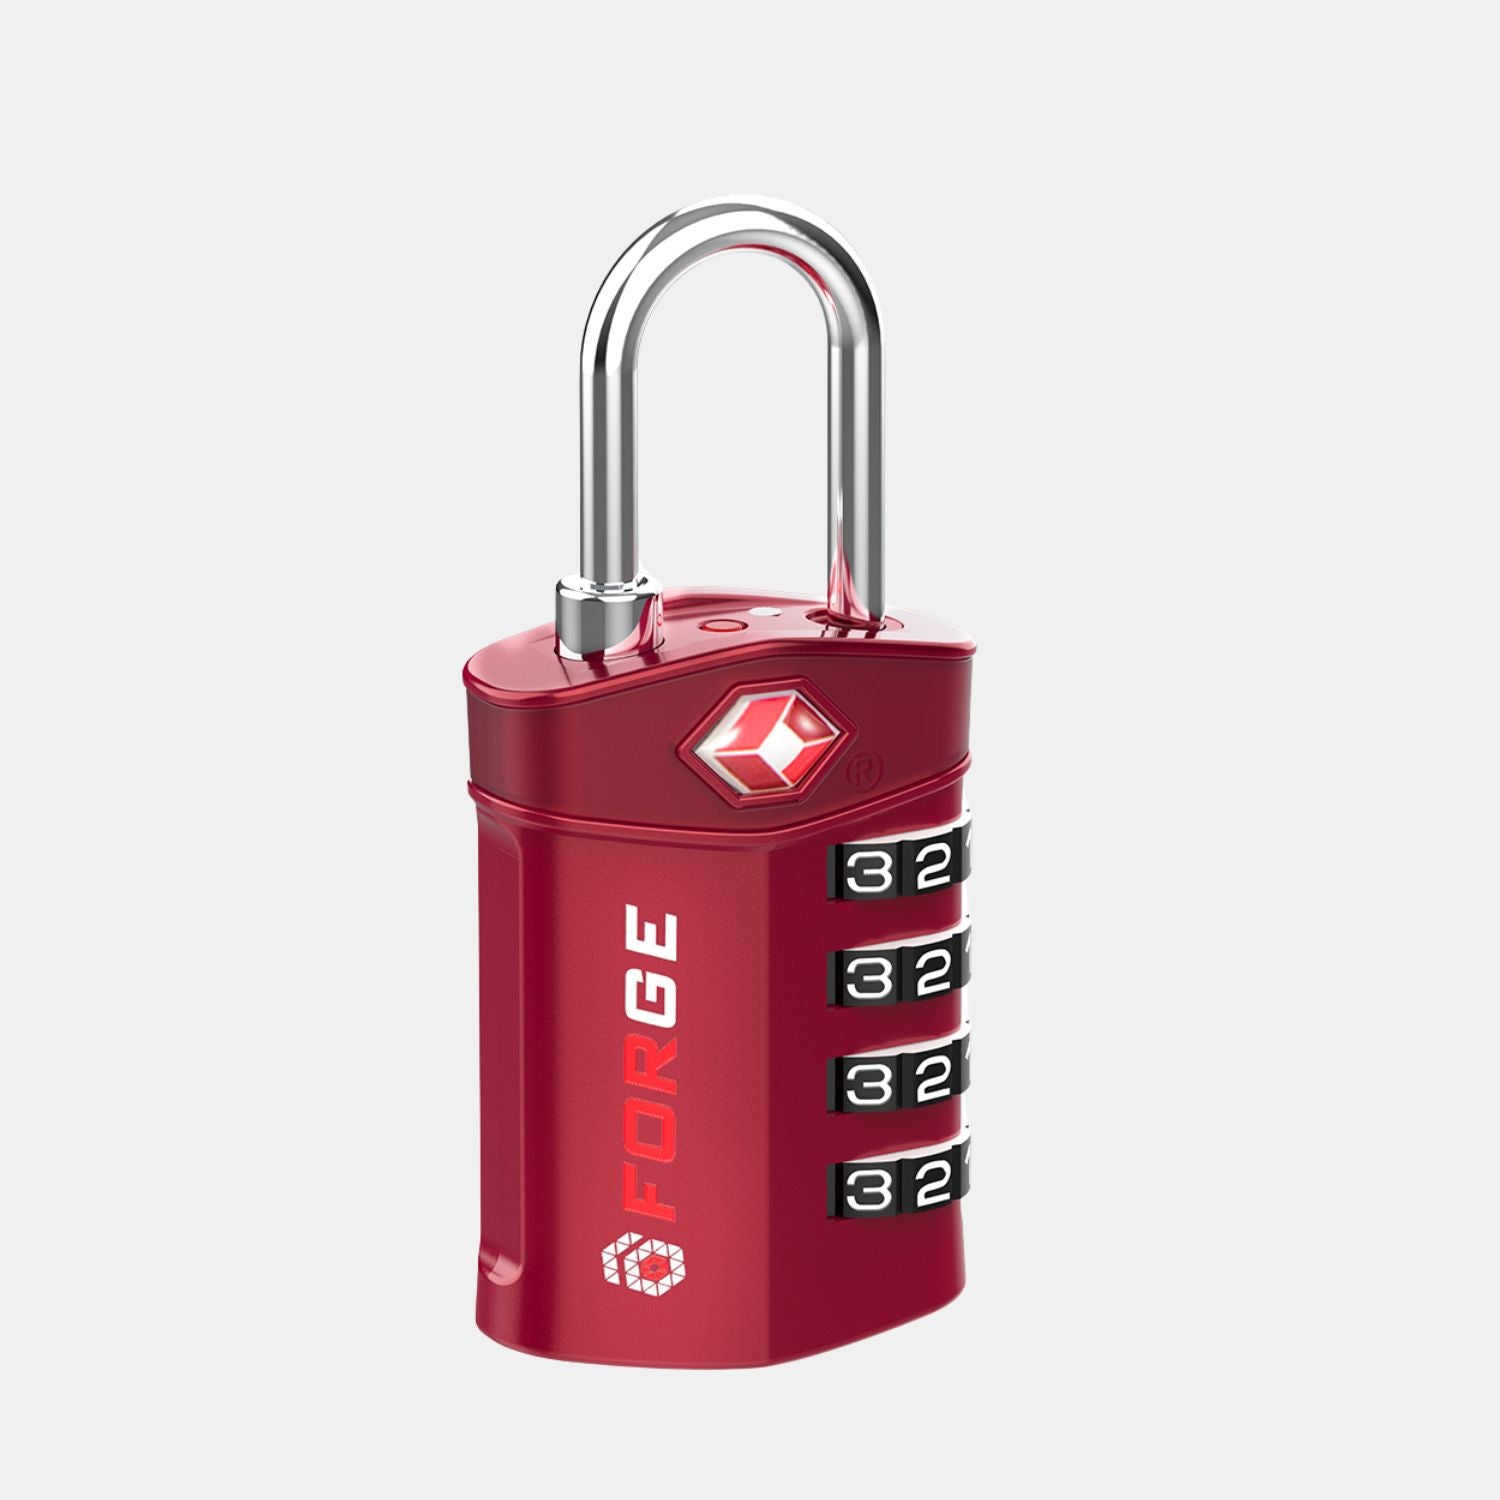 TSA Approved 4-Digit Combination Locks for Luggage and Suitcases. Open Alert, Alloy Body. Red 2 Locks